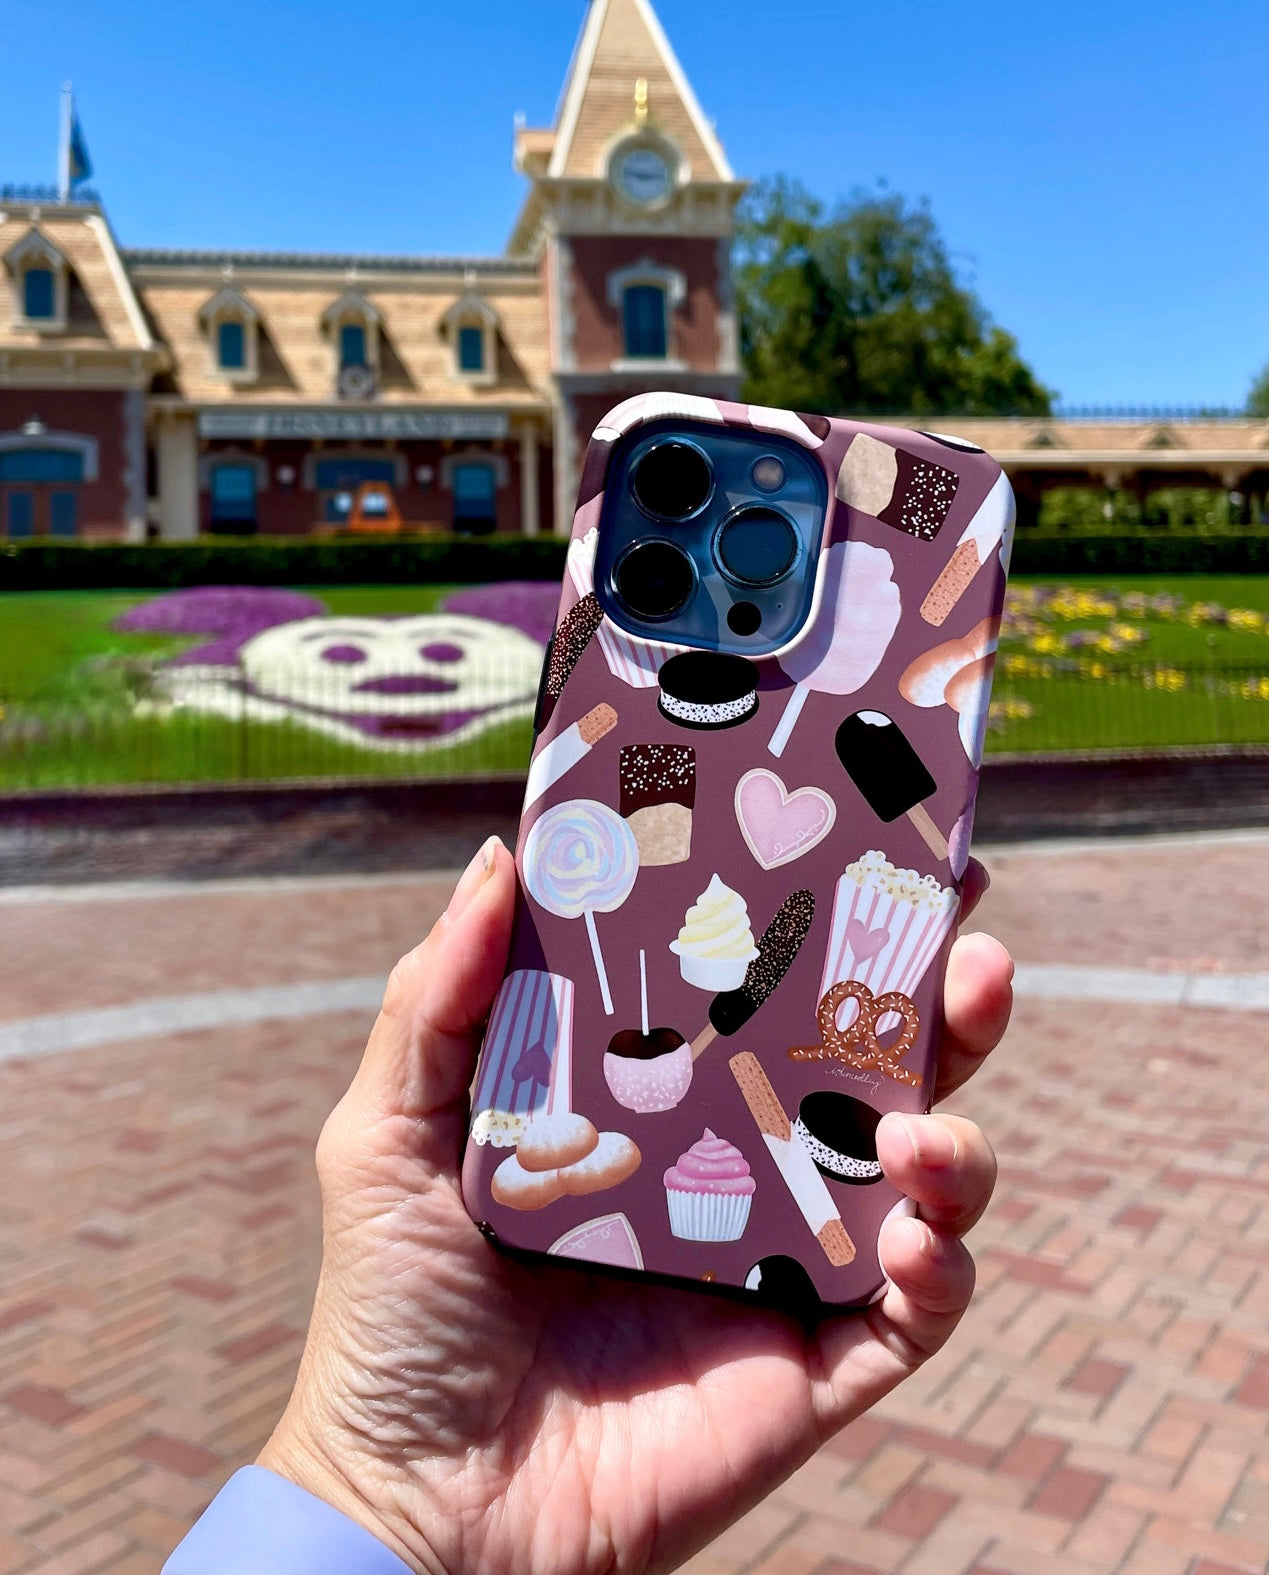 Cute happiest snacks dual layer iphone tough case in front of Mickey grass entry at Disneyland Park.  